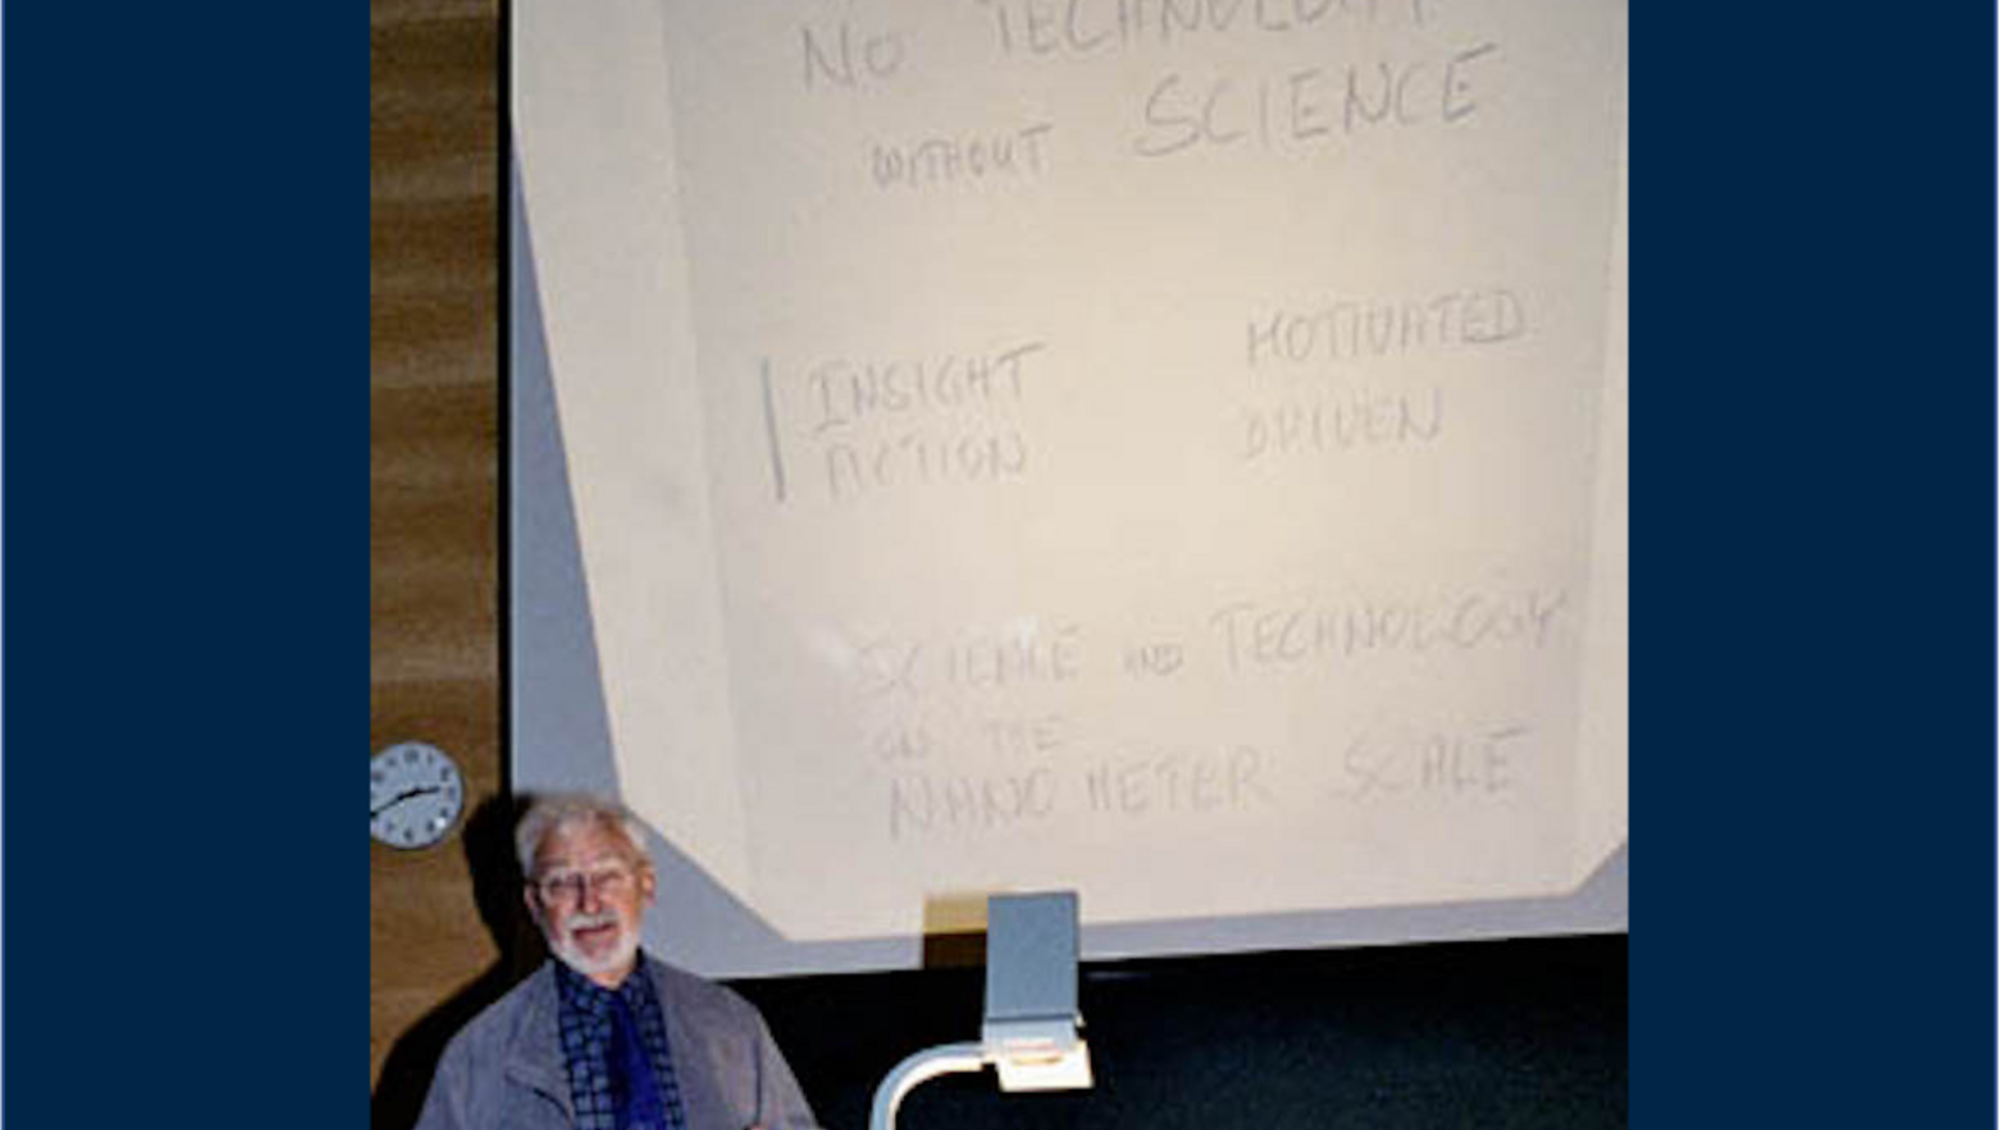 Two Nobel Laureates, including Heinrich Rohrer gave scientific lectures at the inaguration of iNANO in 2002. (Photo: Trolle Linderoth)